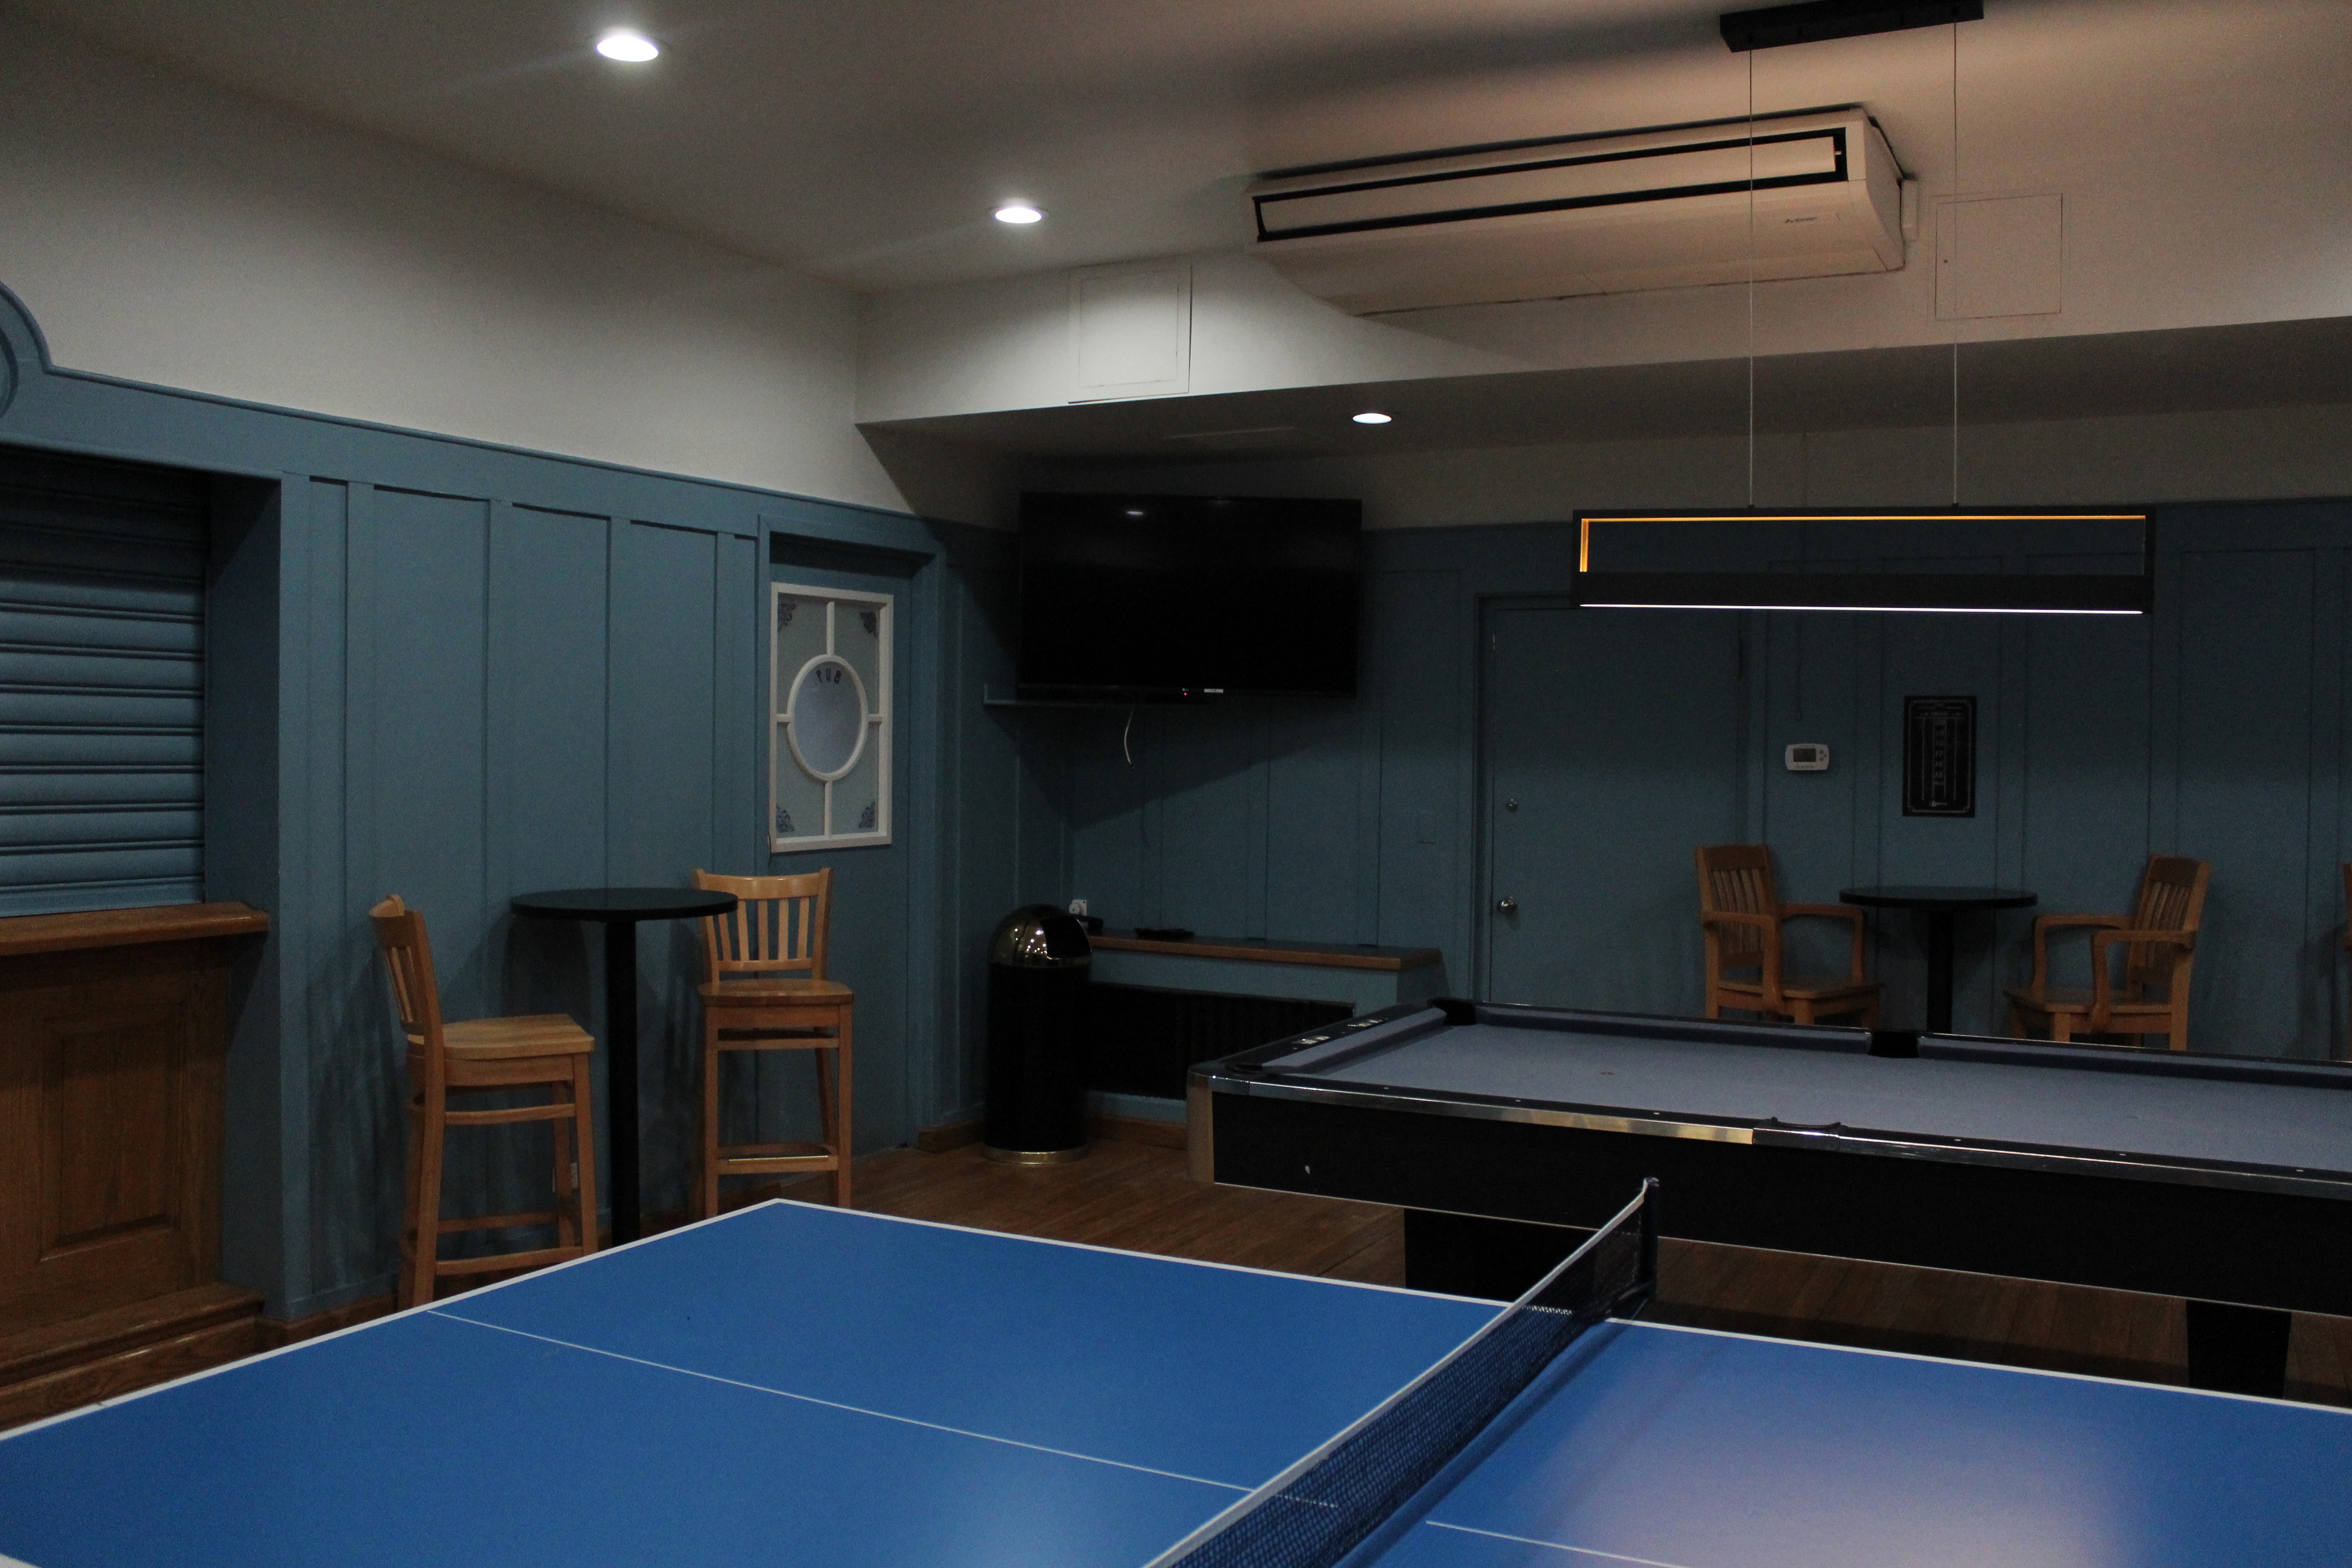 A game room with blue wood-panelled walls and high chairs and pool equipment.